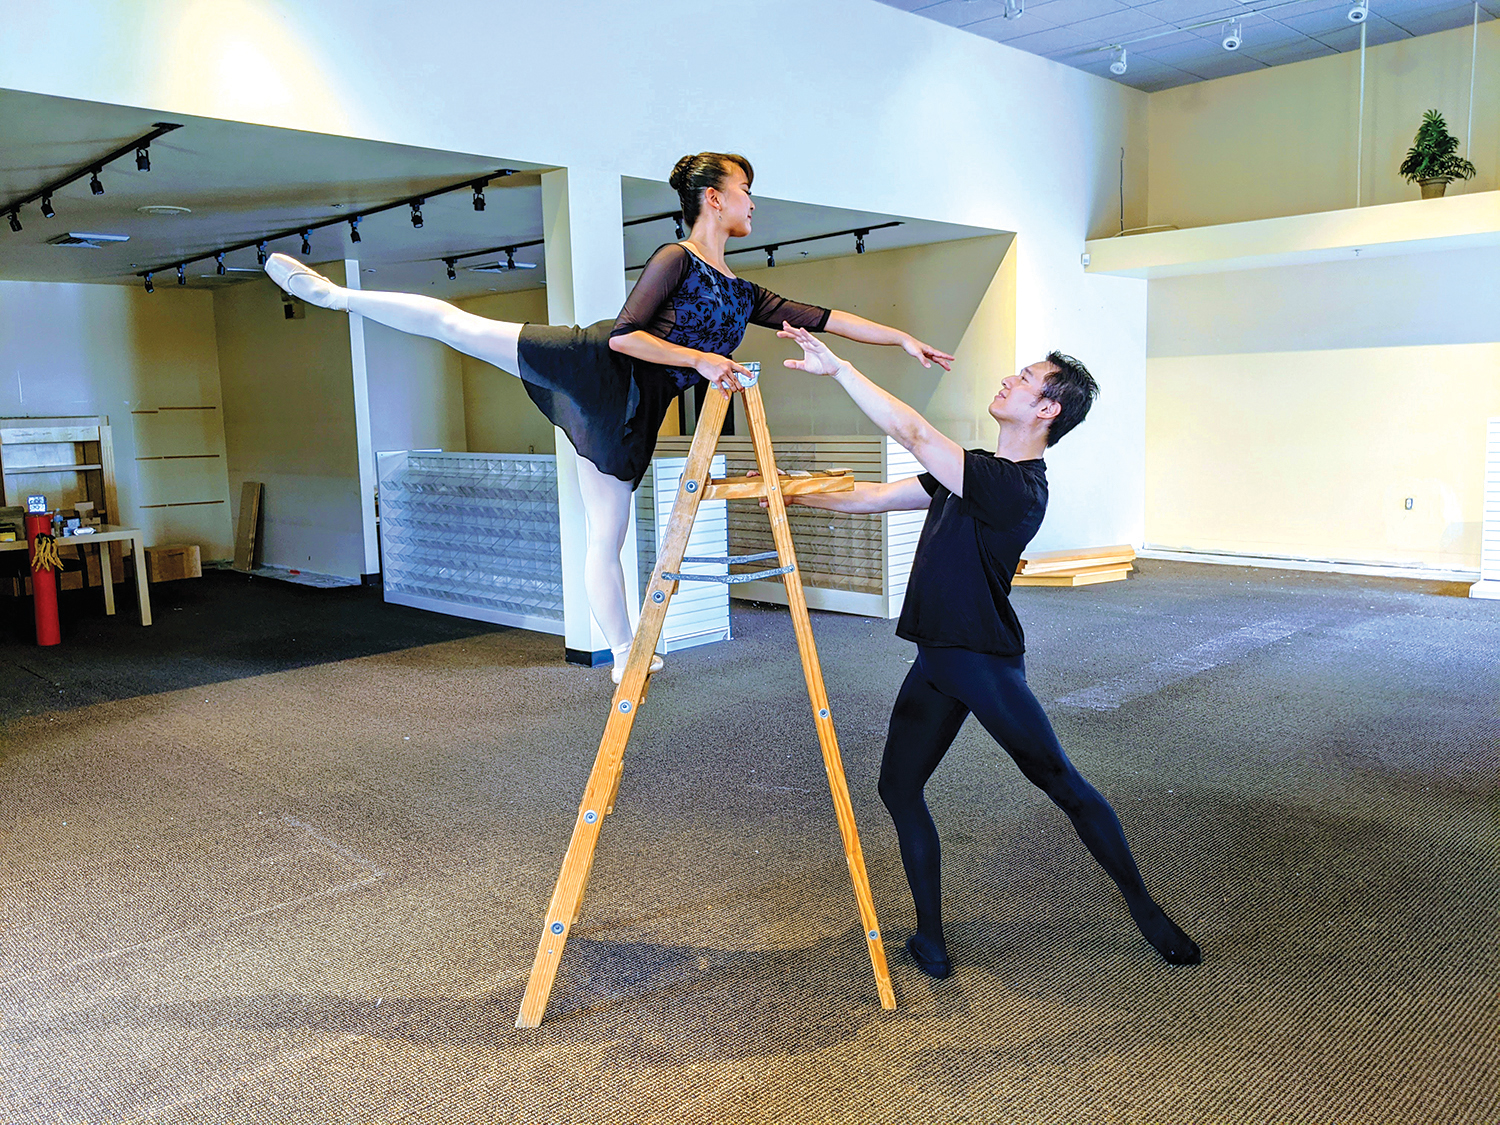 Ballet school, company leaps into larger space